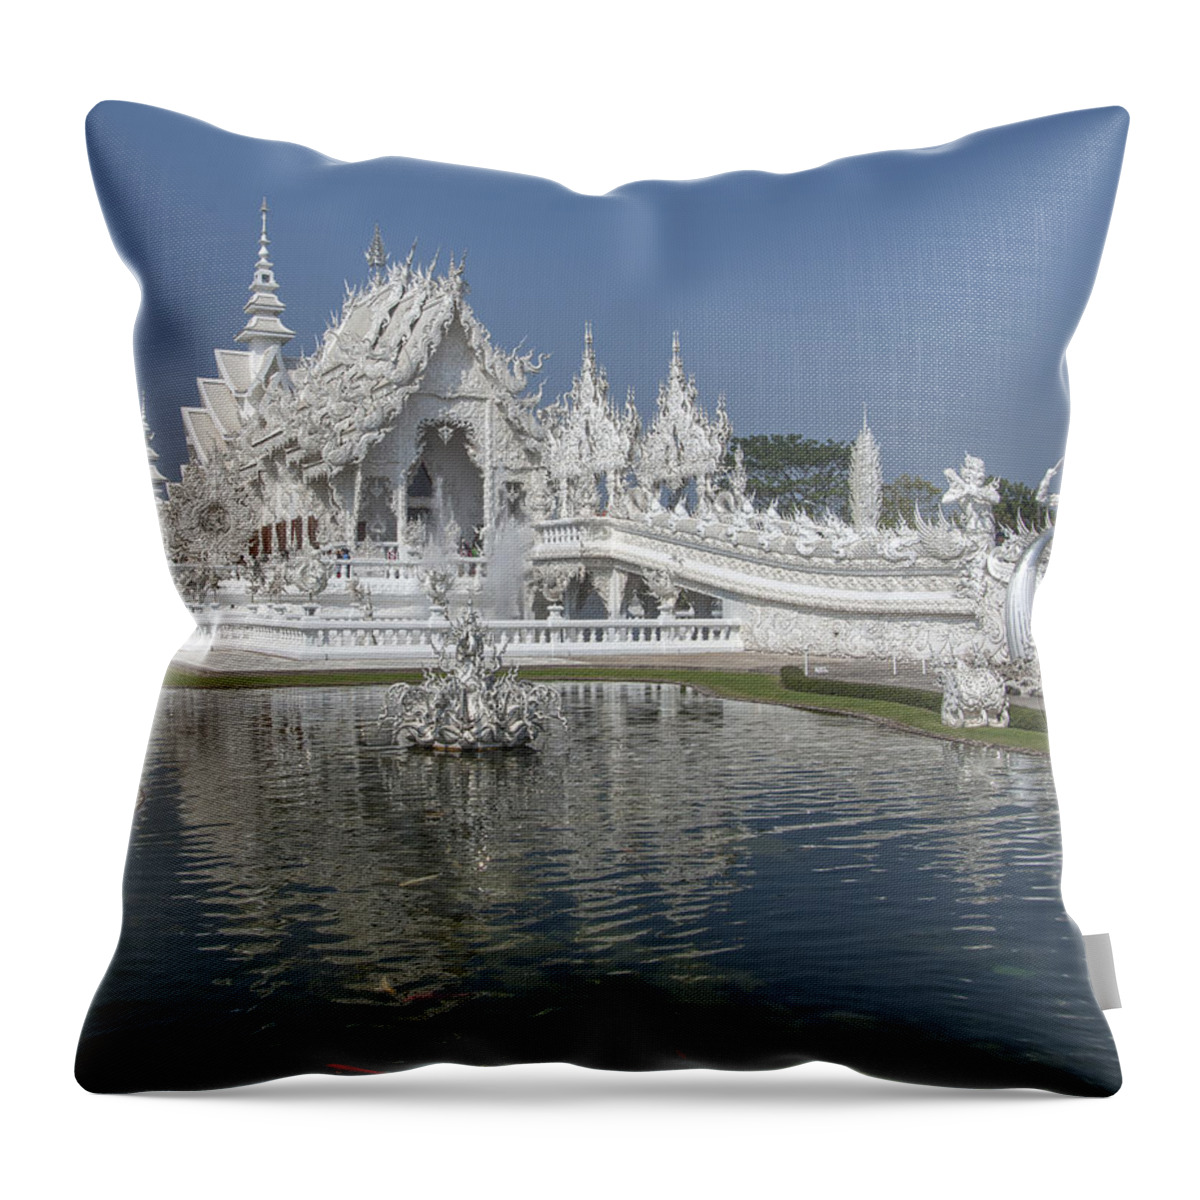 Scenic Throw Pillow featuring the photograph Wat Rong Khun Ubosot DTHCR0001 by Gerry Gantt